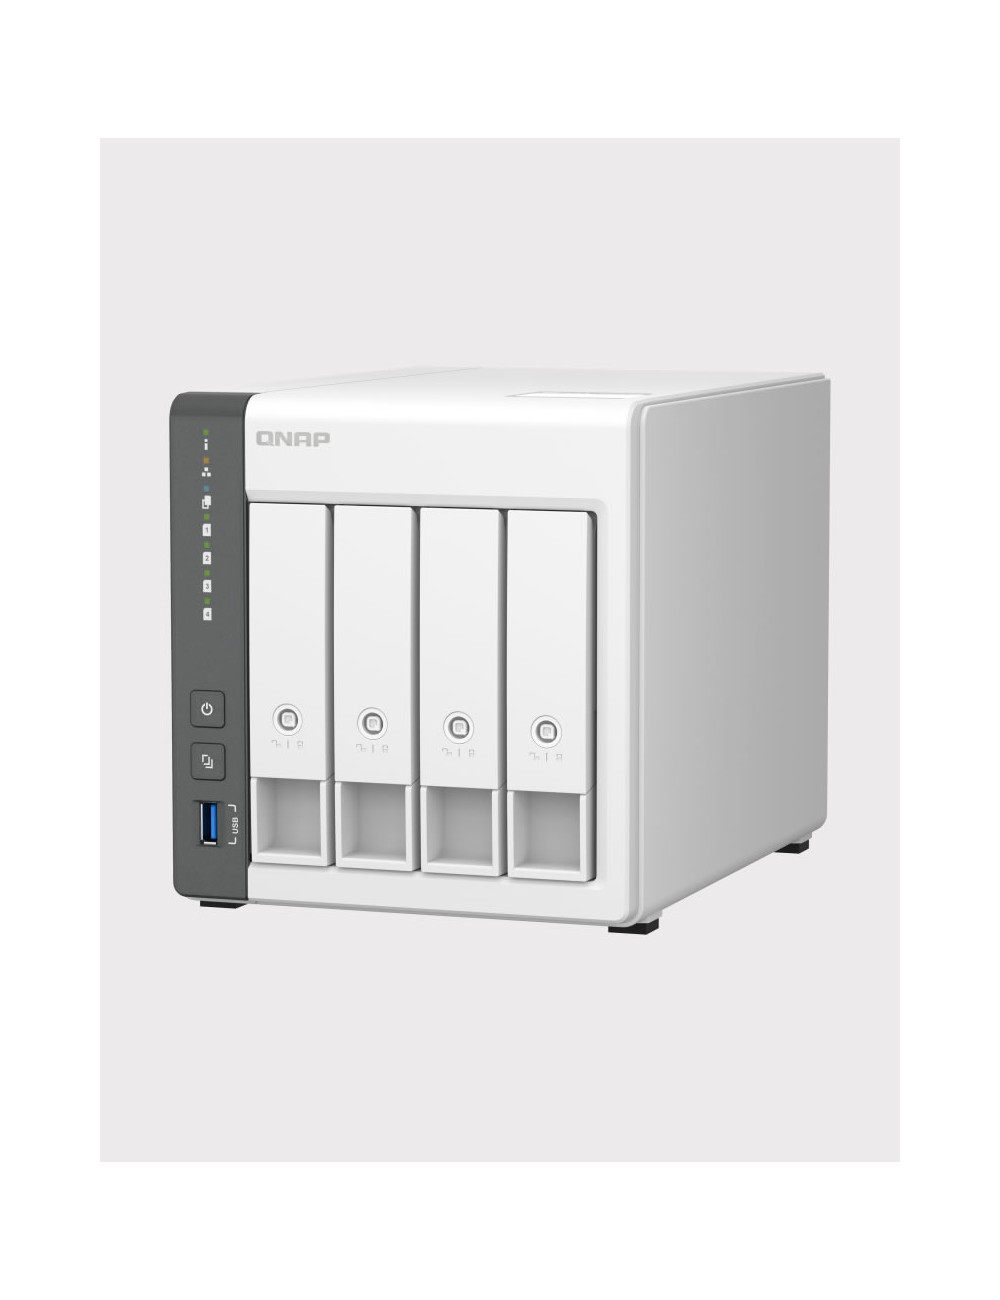 Synology DX517 Unité d'extension IRONWOLF PRO 10To (5x2To)